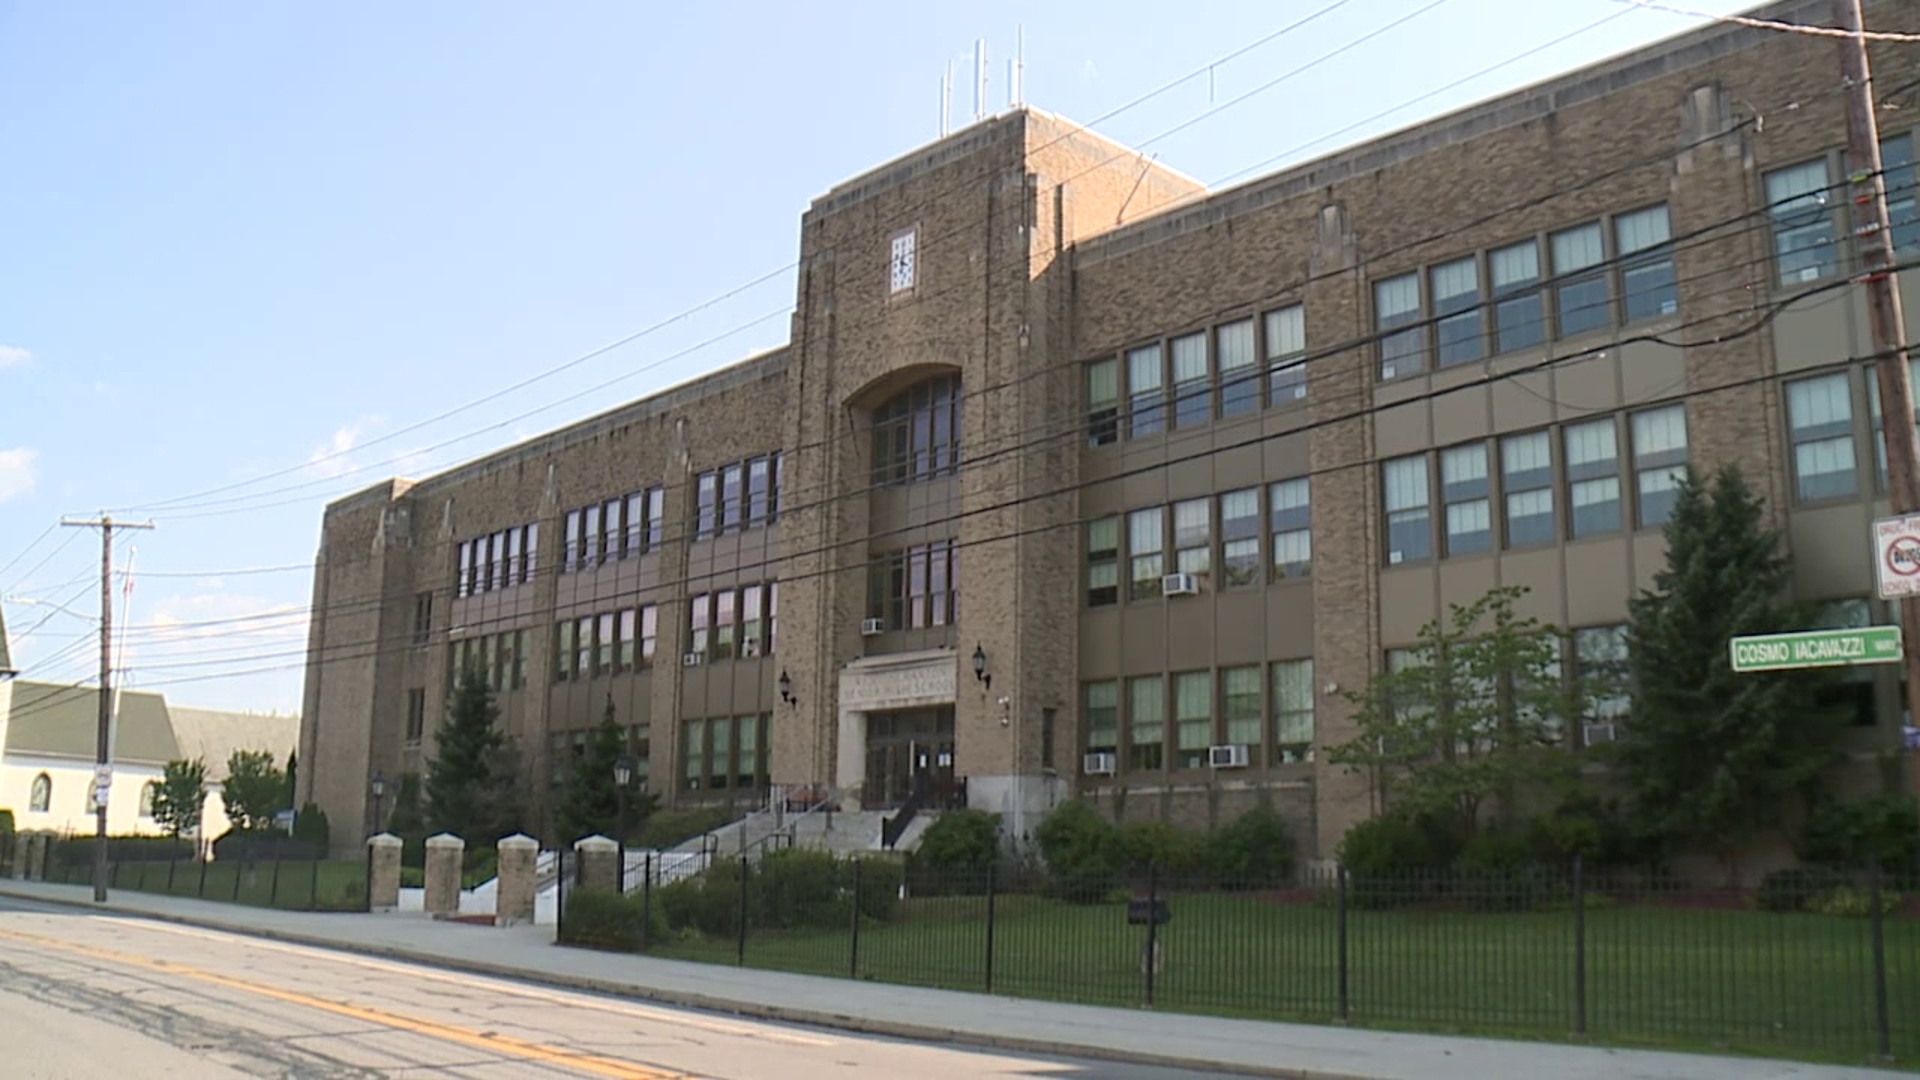 The Scranton School District is increasing security over fighting and threats of violence between students.